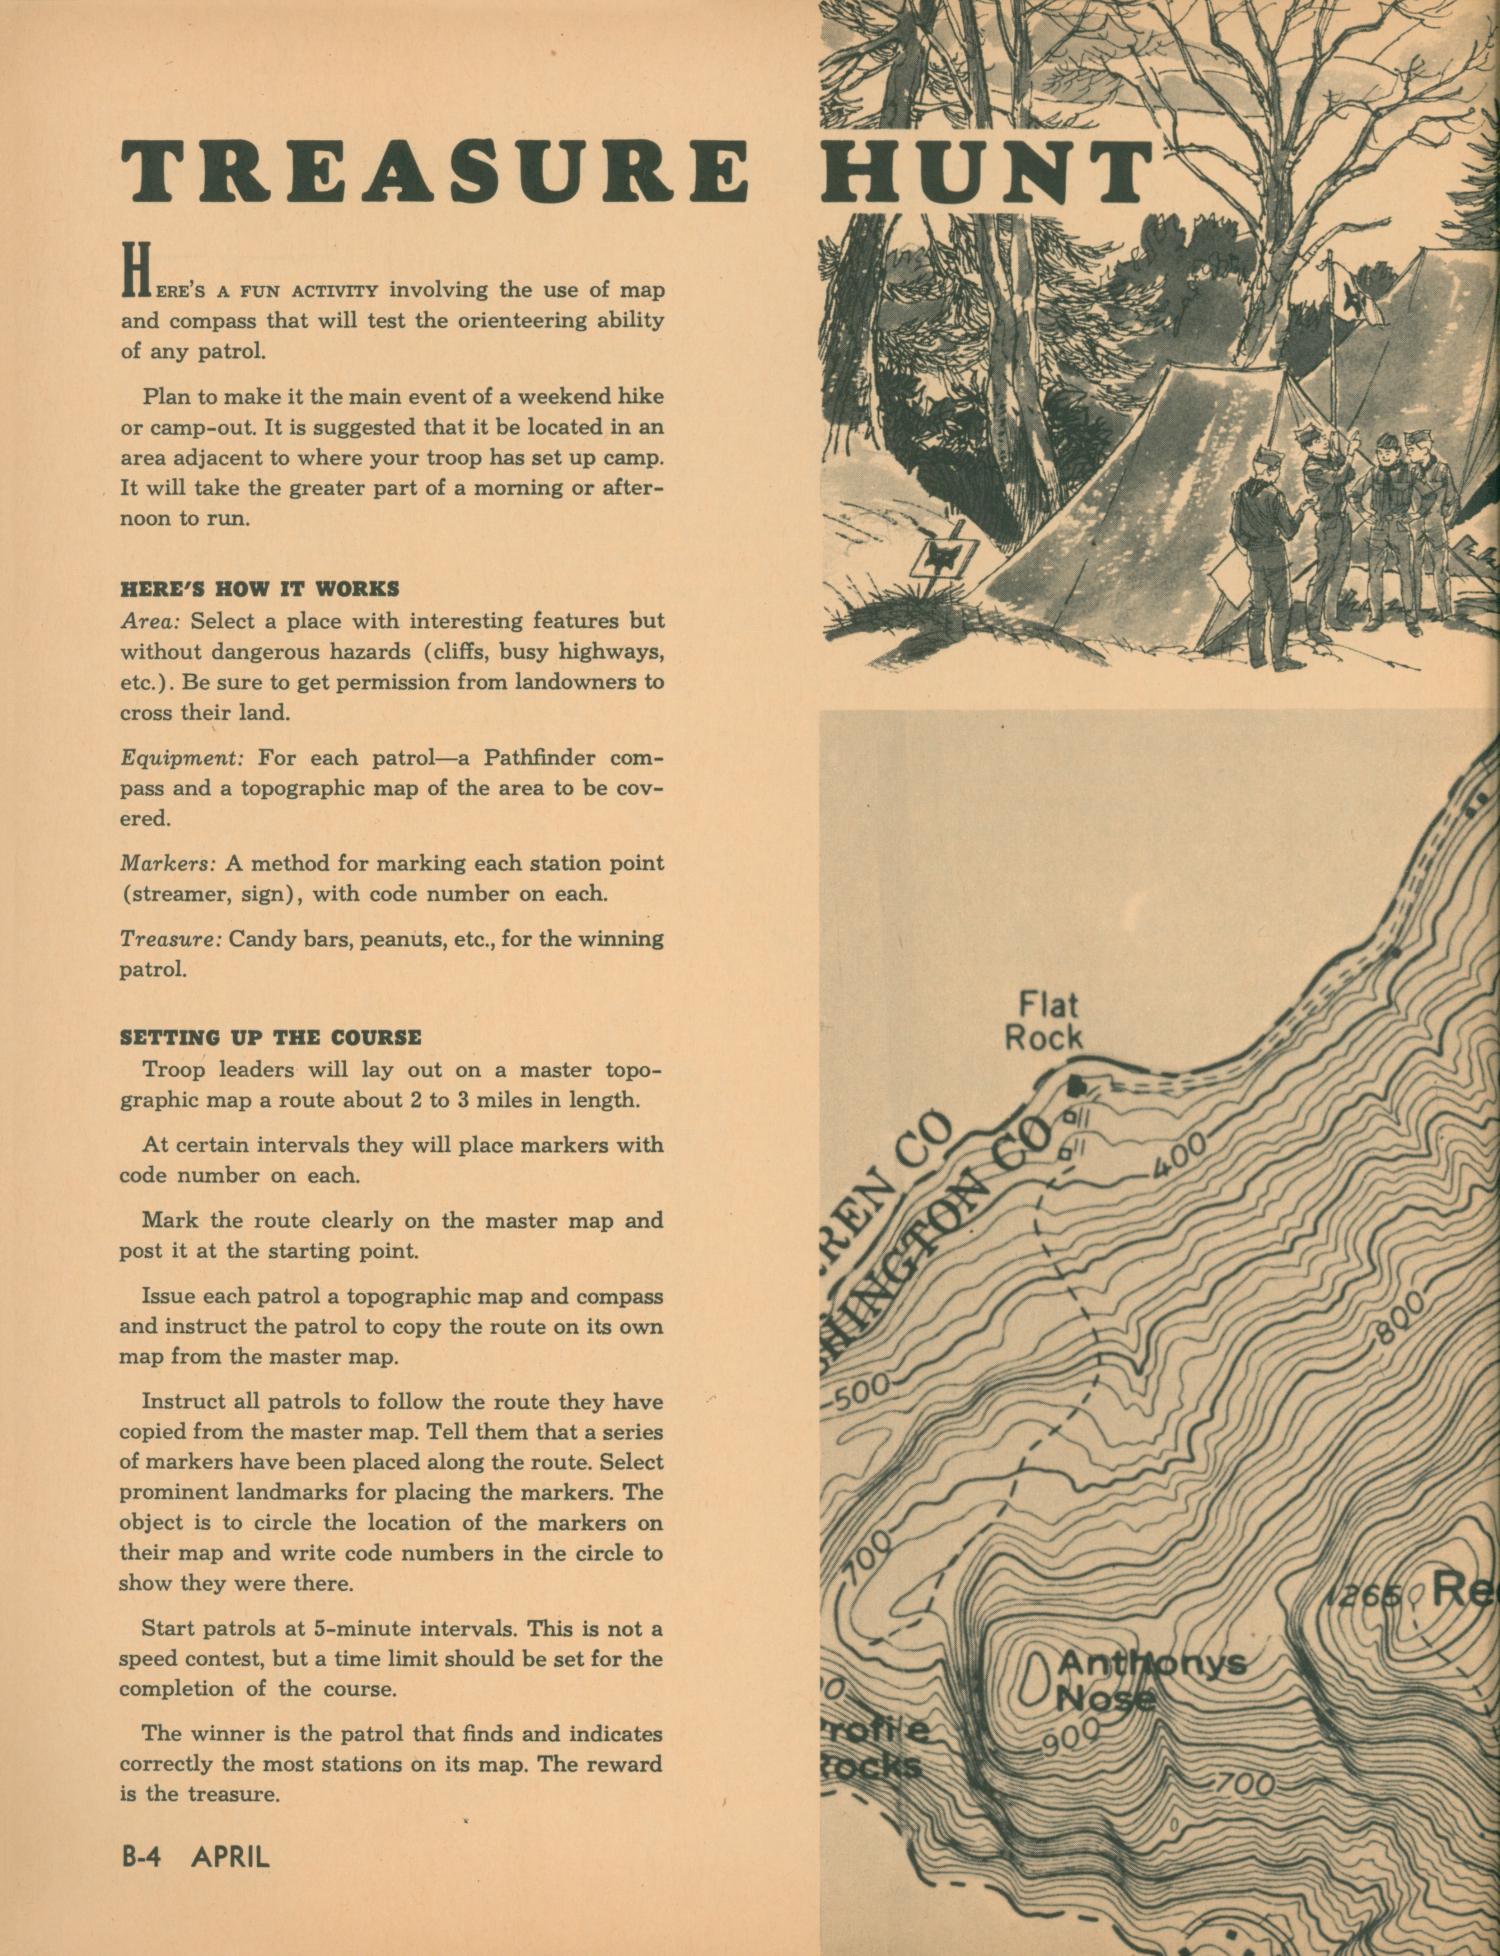 Scouting, Volume 57, Number 2, February 1969
                                                
                                                    4
                                                